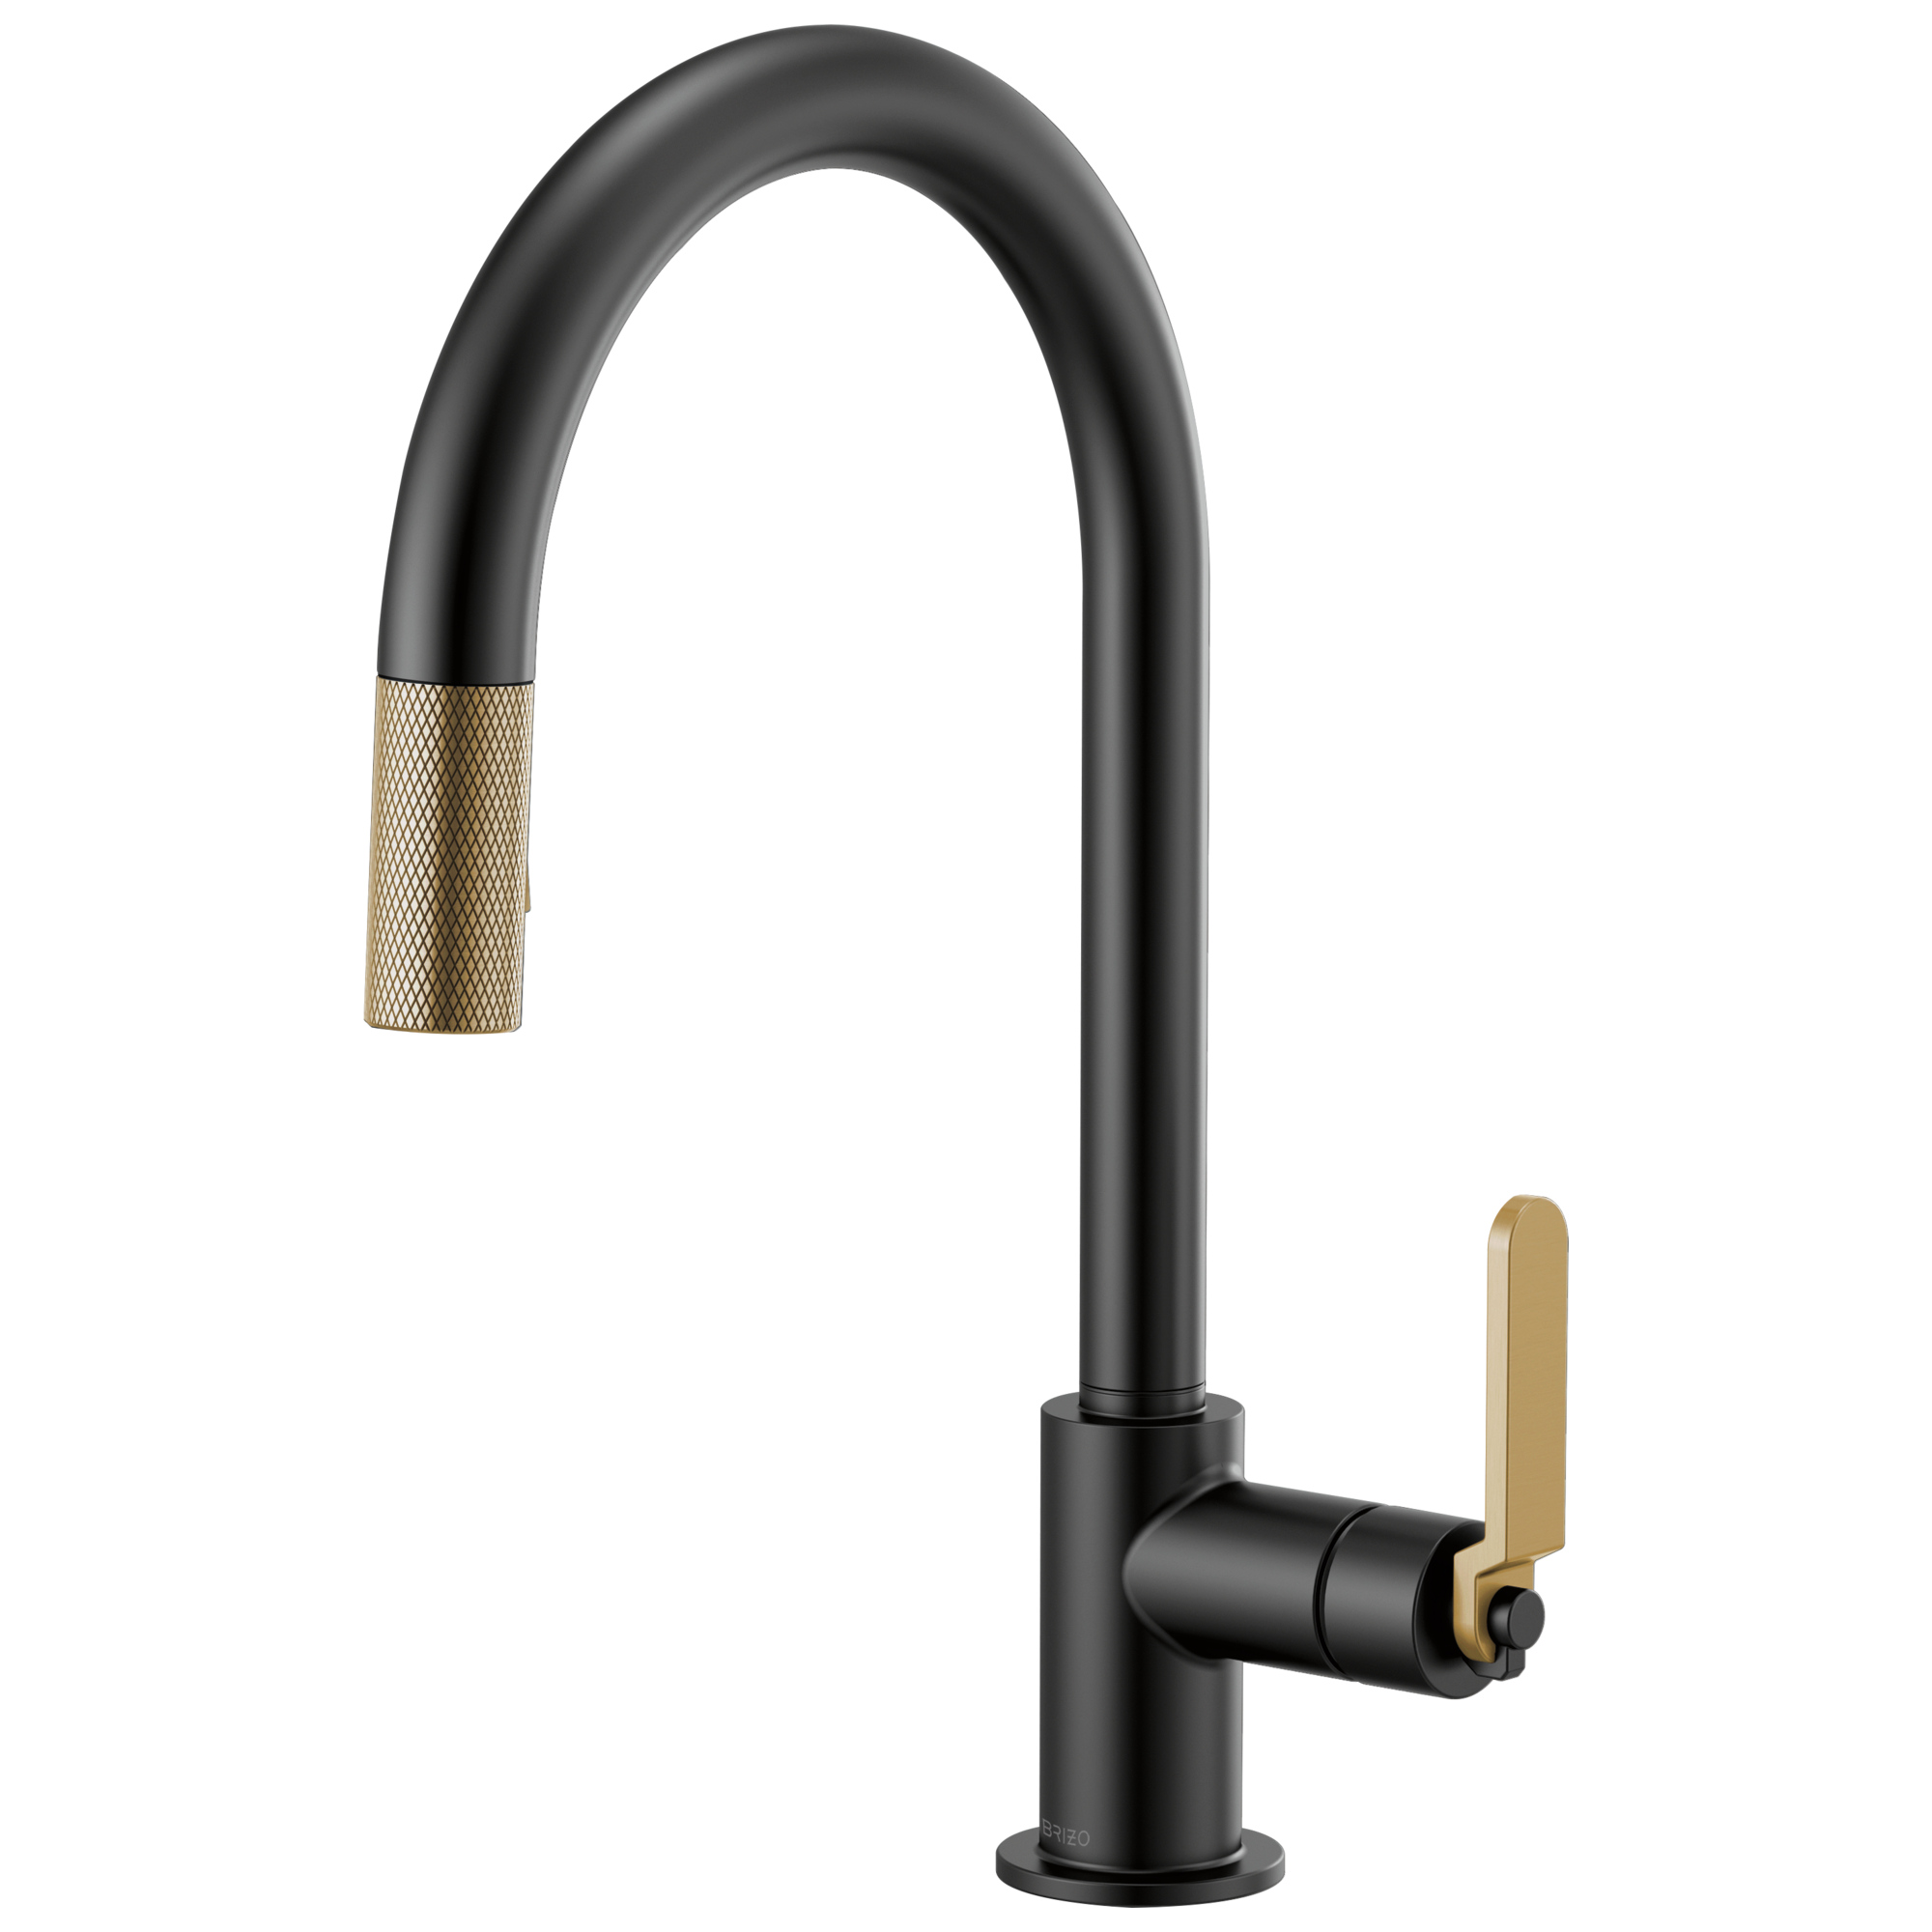 matte black / luxe gold pull-down faucet